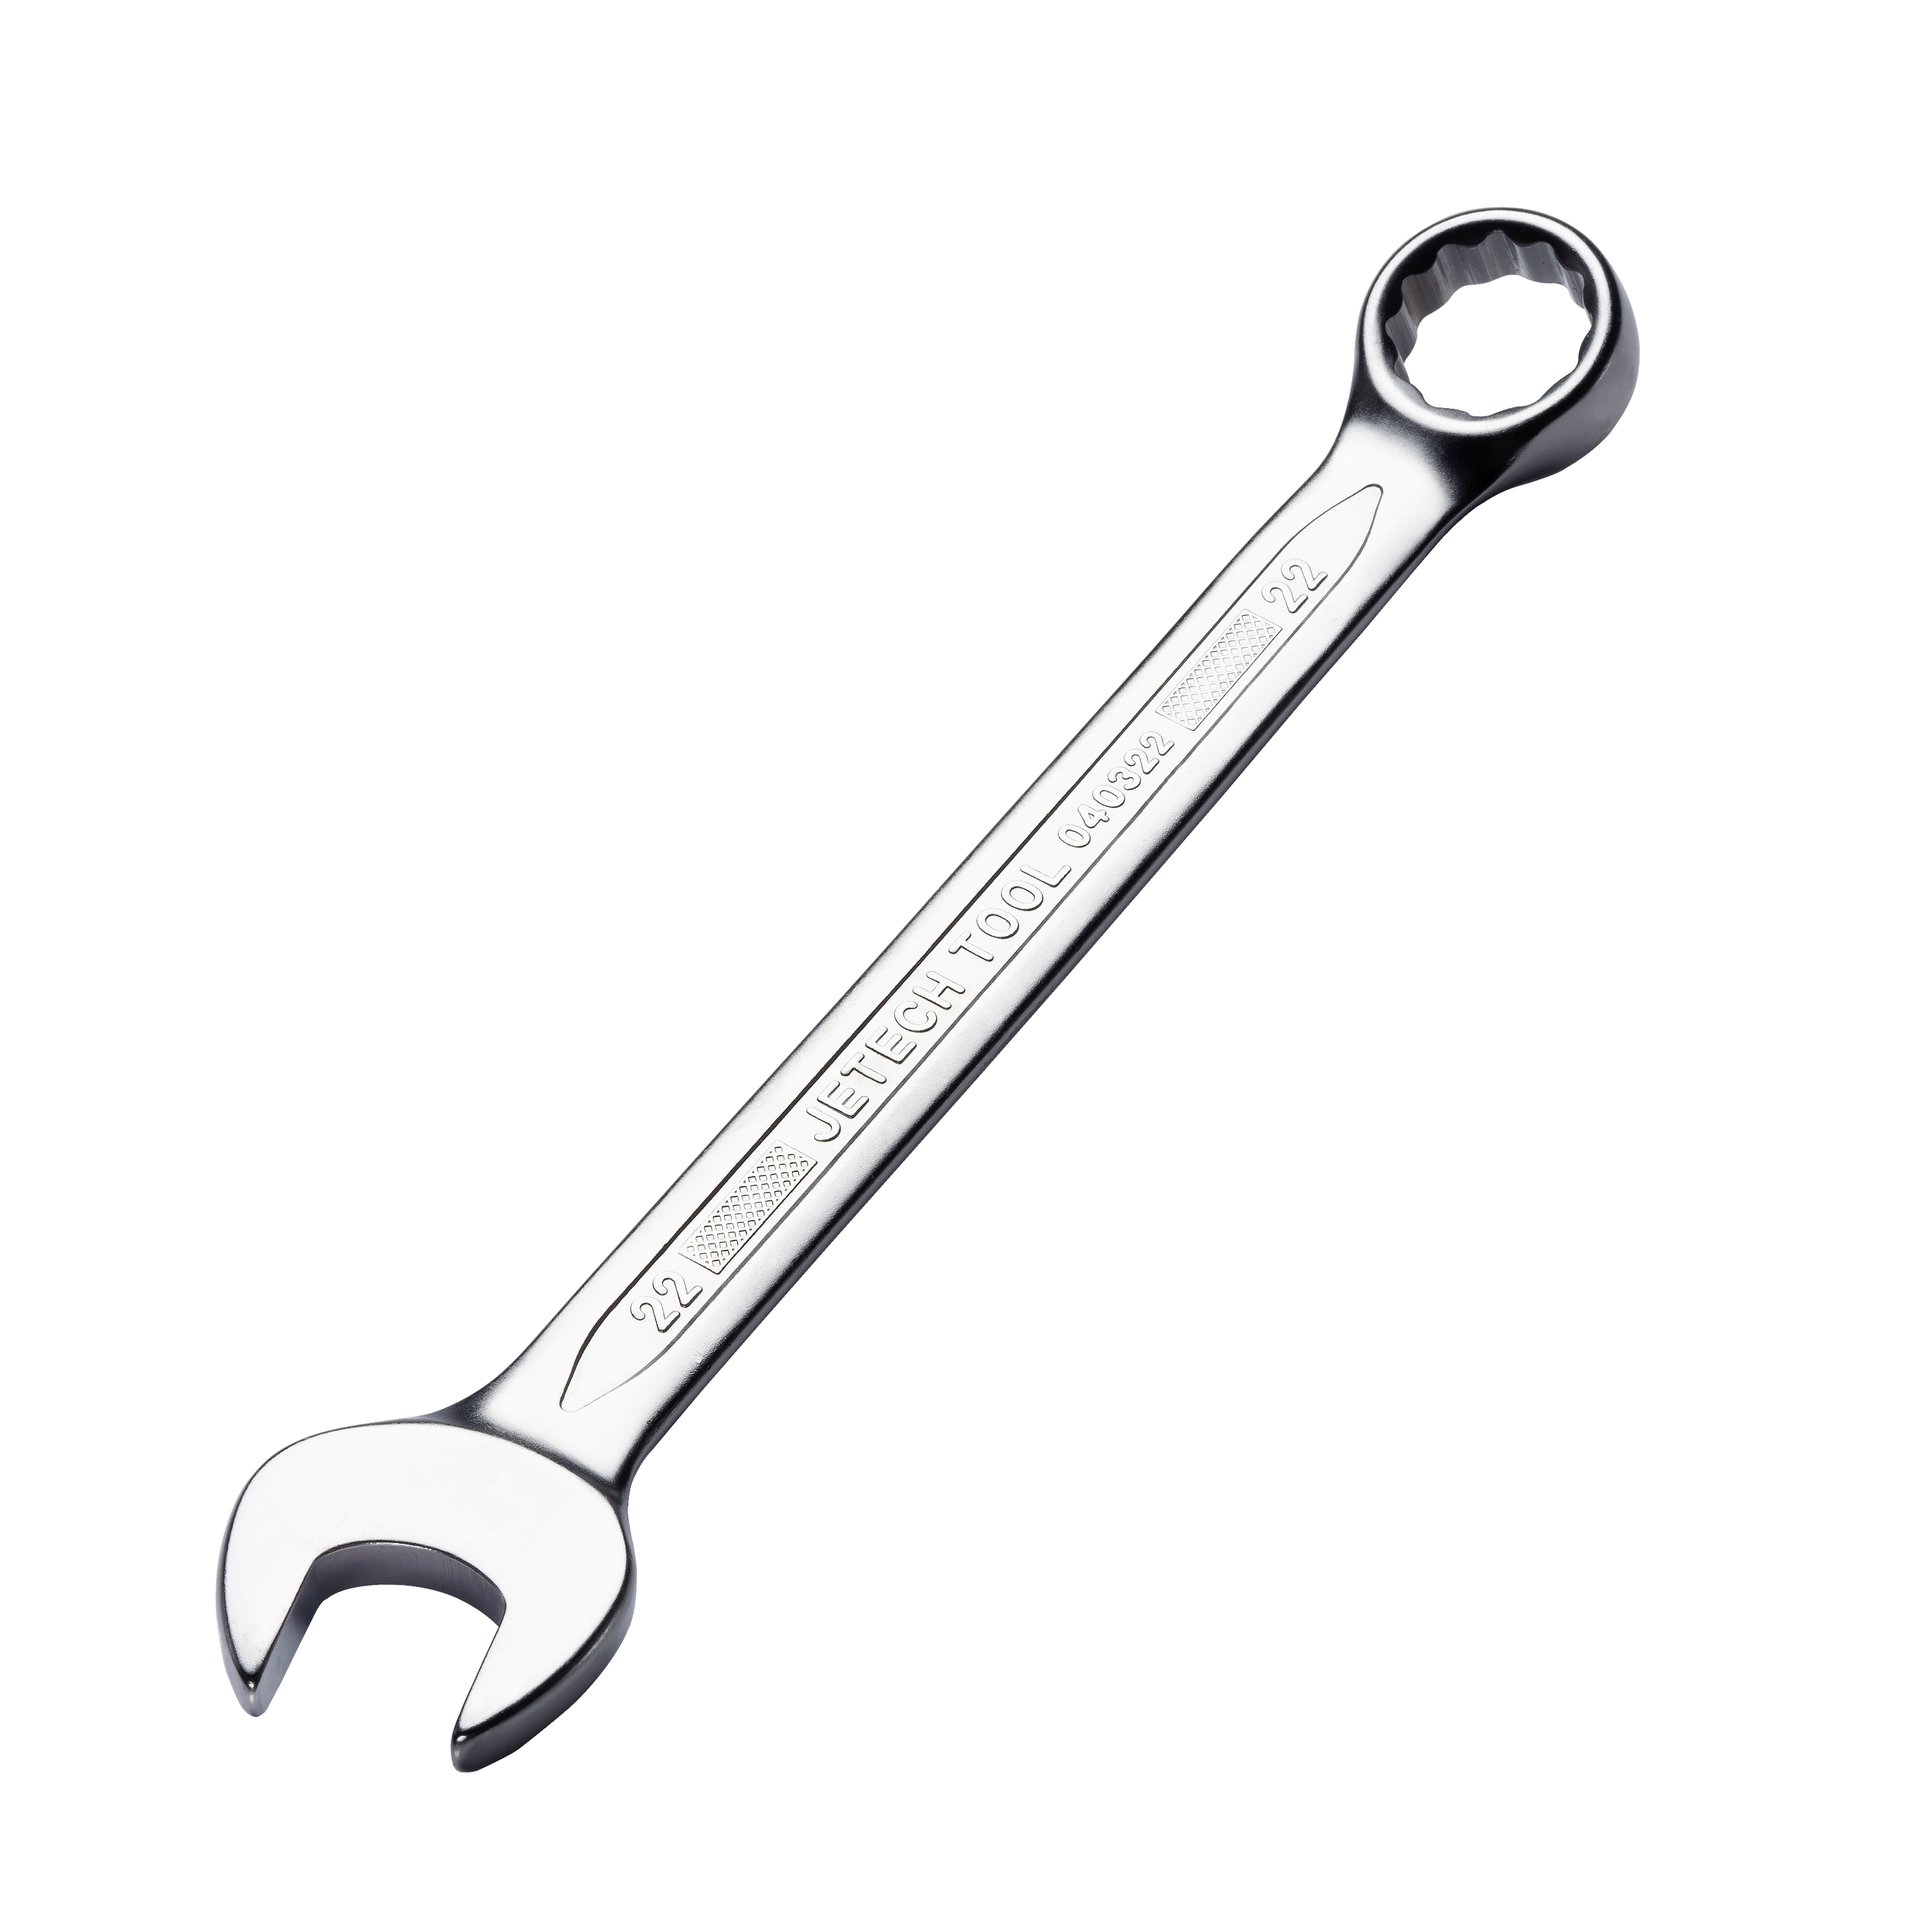 Jetech Combination Wrench, Metric, 22mm